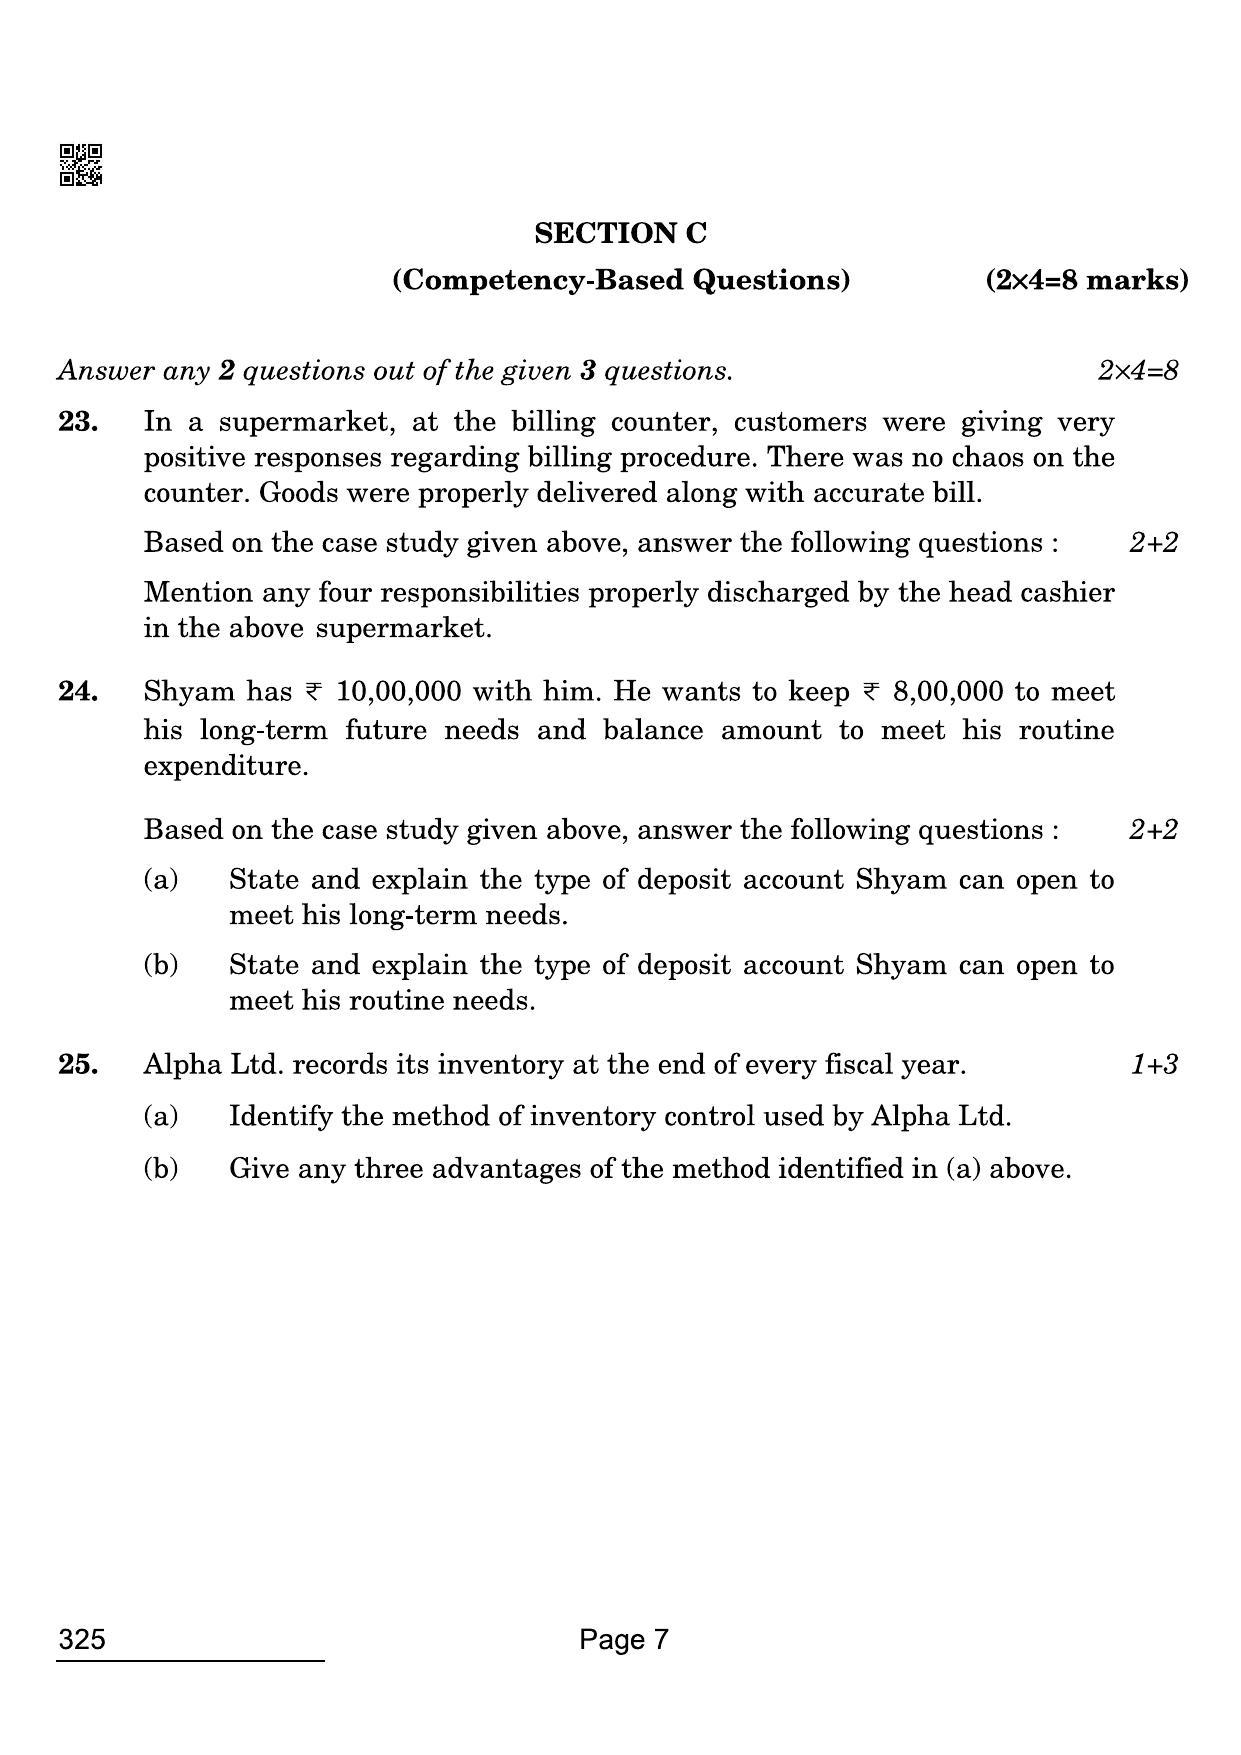 CBSE Class 12 325 Retail 2022 Compartment Question Paper - Page 7